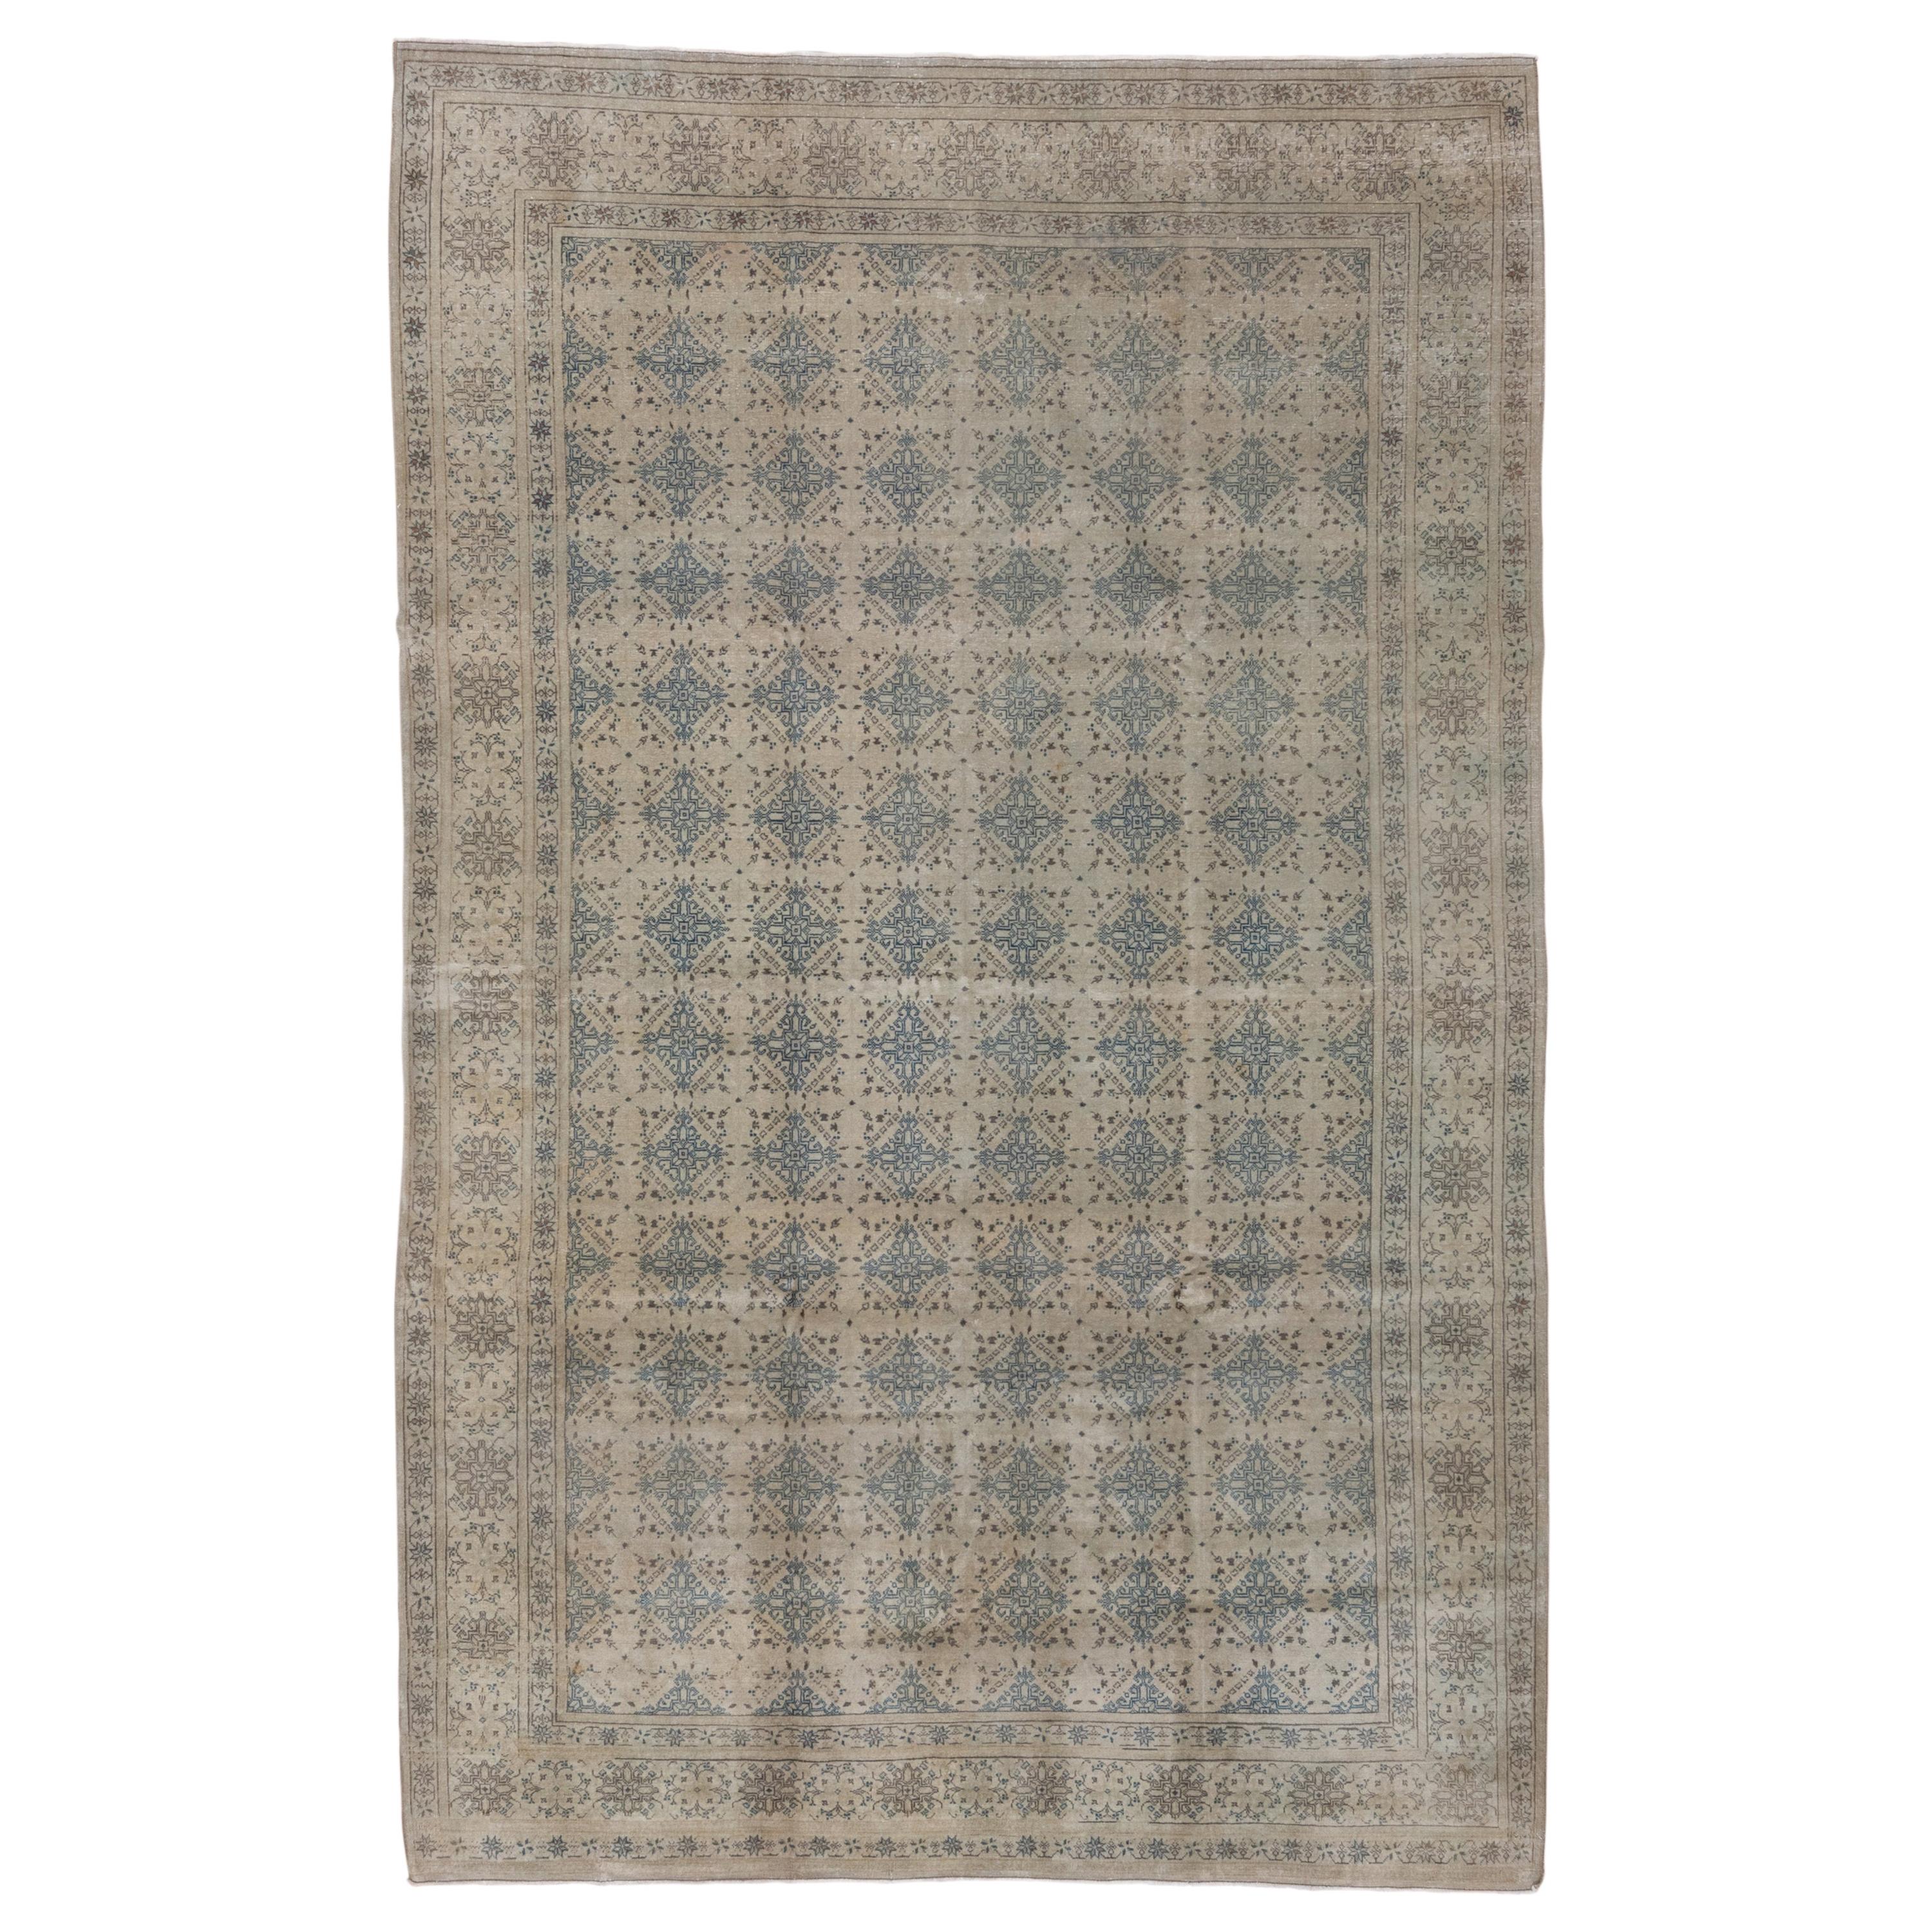 Lightly Worn Sage Green Antique Turkish Sivas Rug with Blue Accents, circa 1930s For Sale